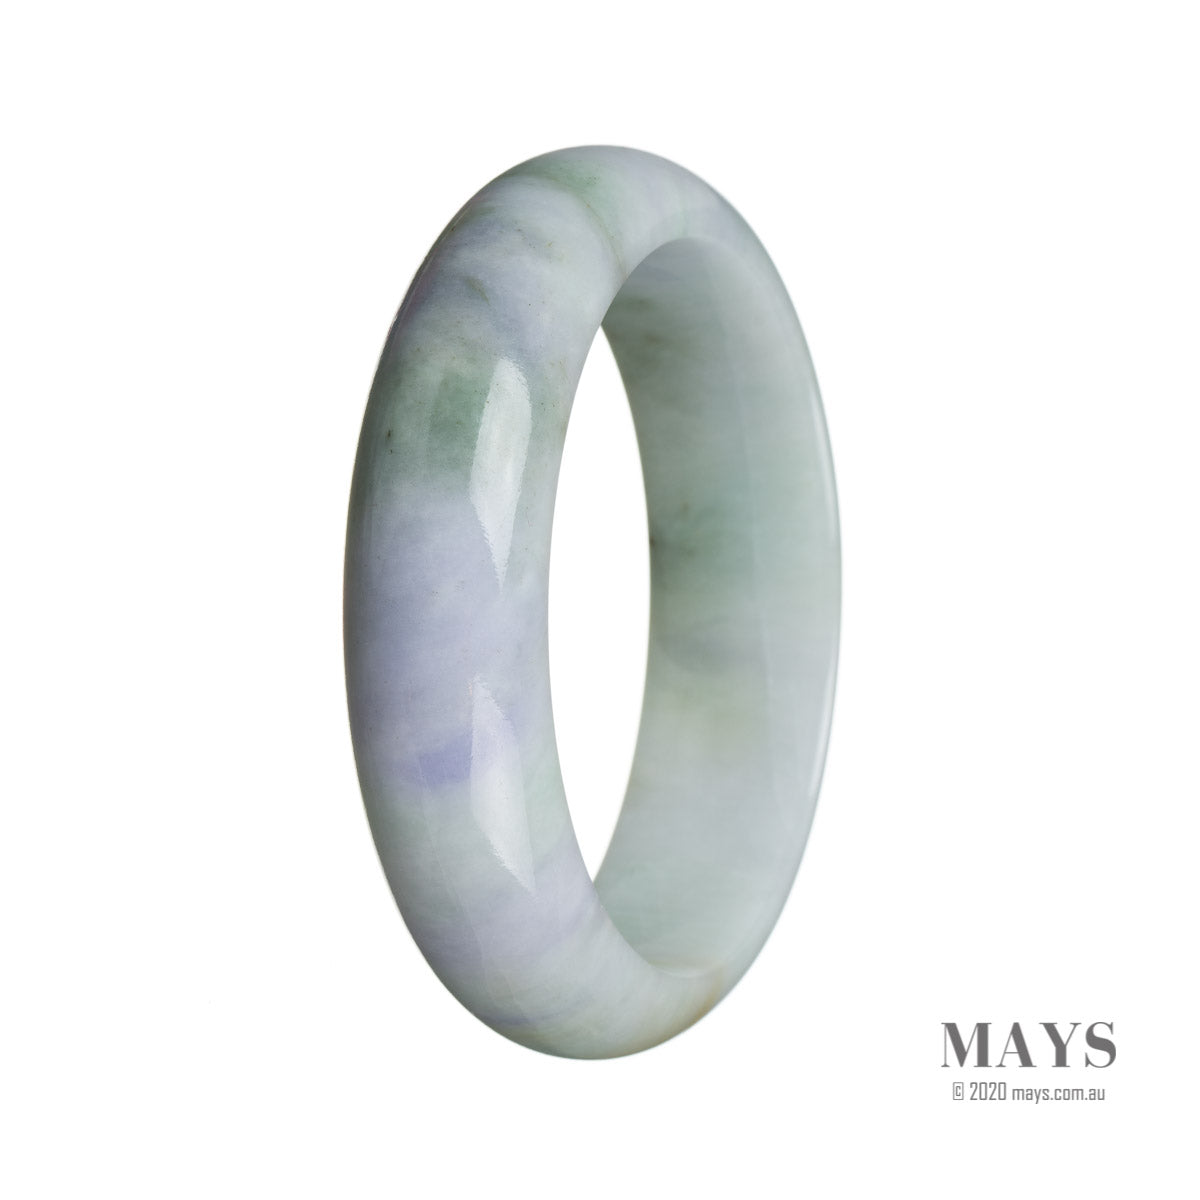 Close-up of a light green and lavender jade bracelet, featuring a half-moon shape and a smooth, polished surface. This high-quality Burma jade exudes elegance and charm.